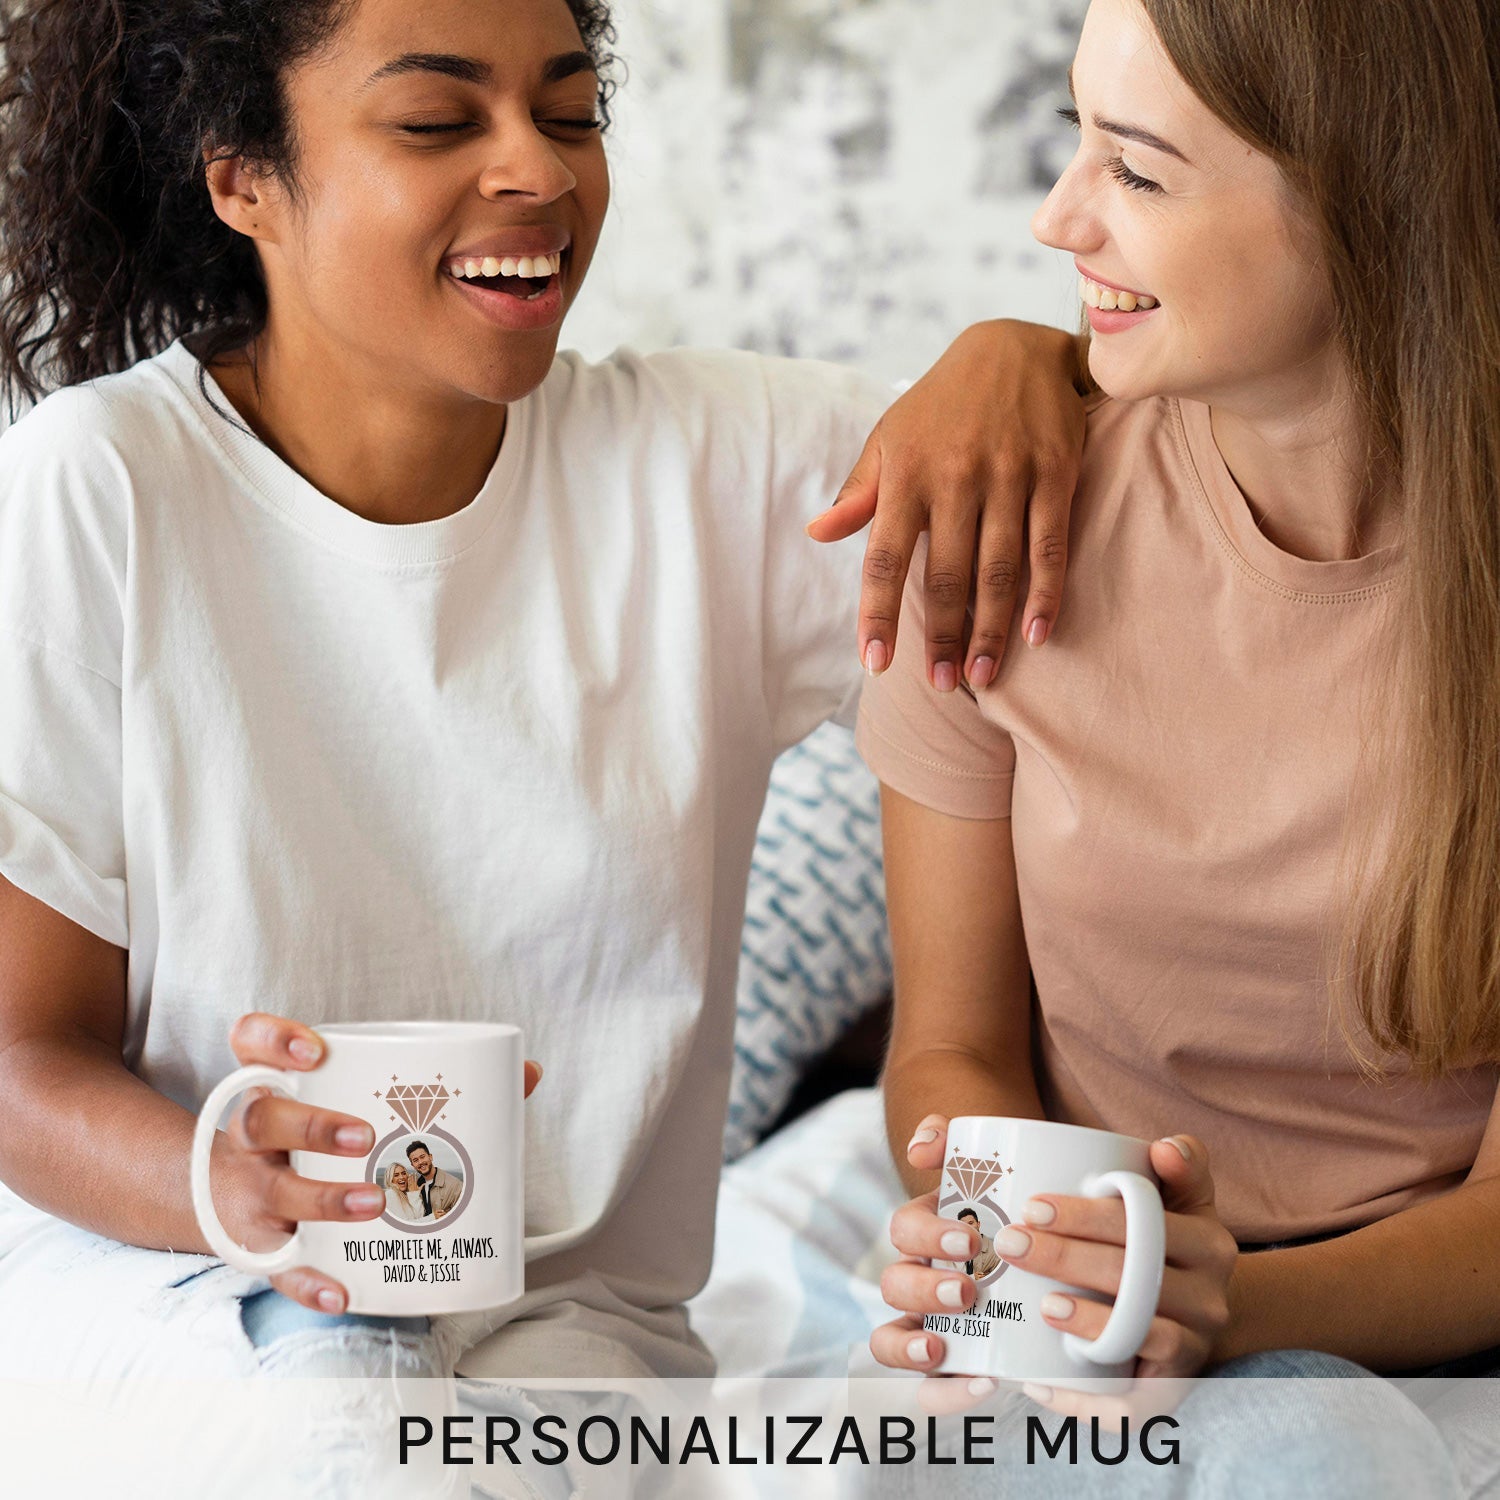 You Complete Me Always - Personalized Anniversary, Valentine's Day, Birthday or Christmas gift For Husband or Wife - Custom Mug - MyMindfulGifts